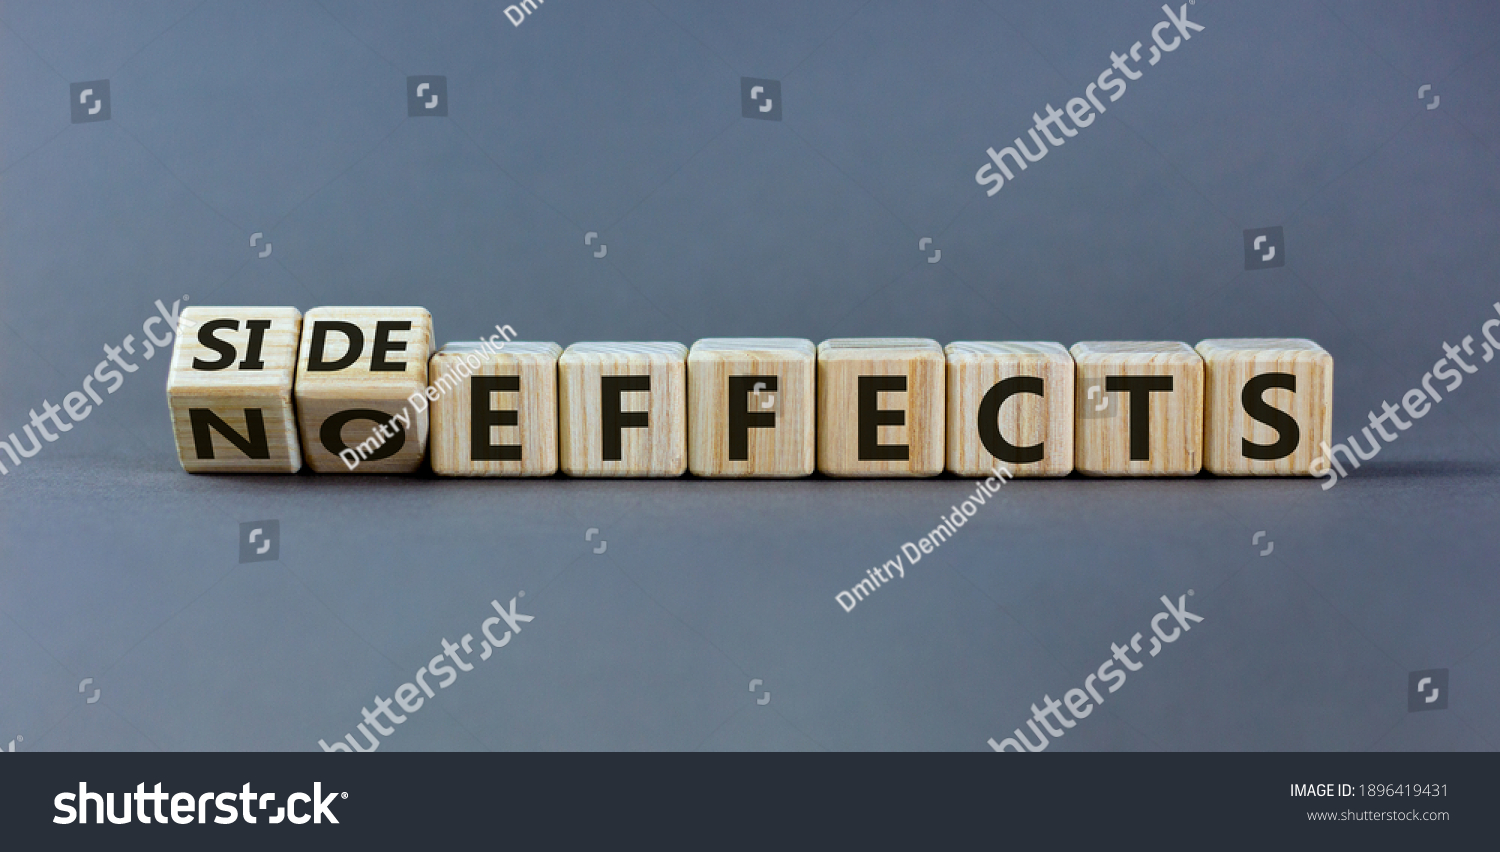 Side or no effects symbol. Turned wooden cubes and changed words 'no effects' to 'side effects'. Beautiful grey background, copy space. Medical, covid-19 pandemic corona side effects concept. #1896419431